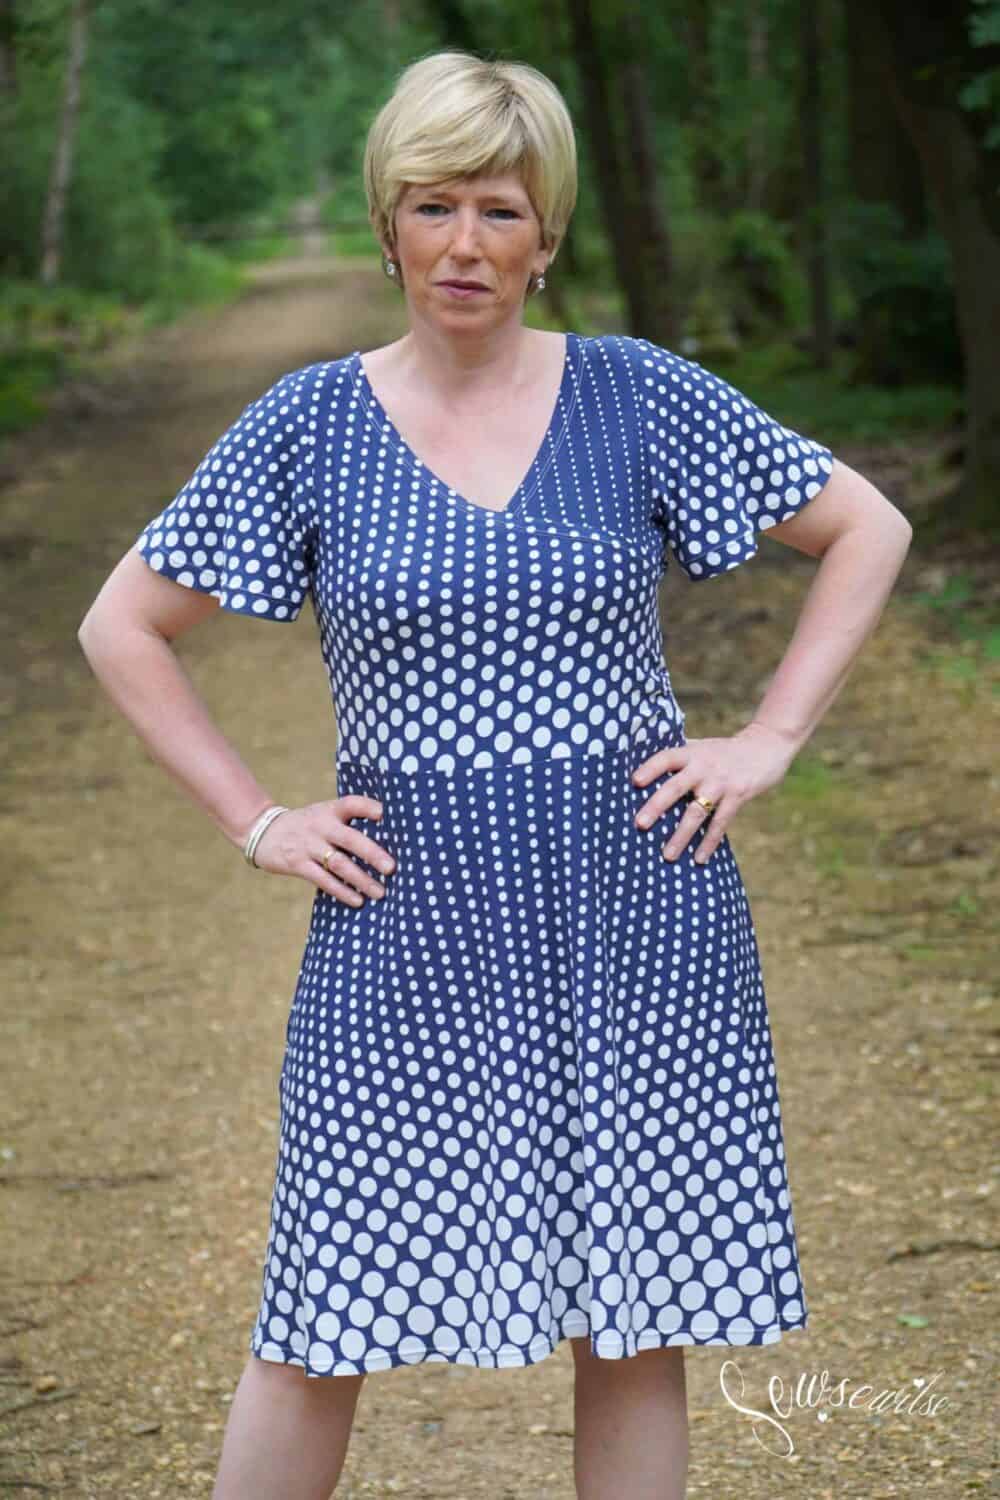 Wrap dress sewing pattern meant for ...